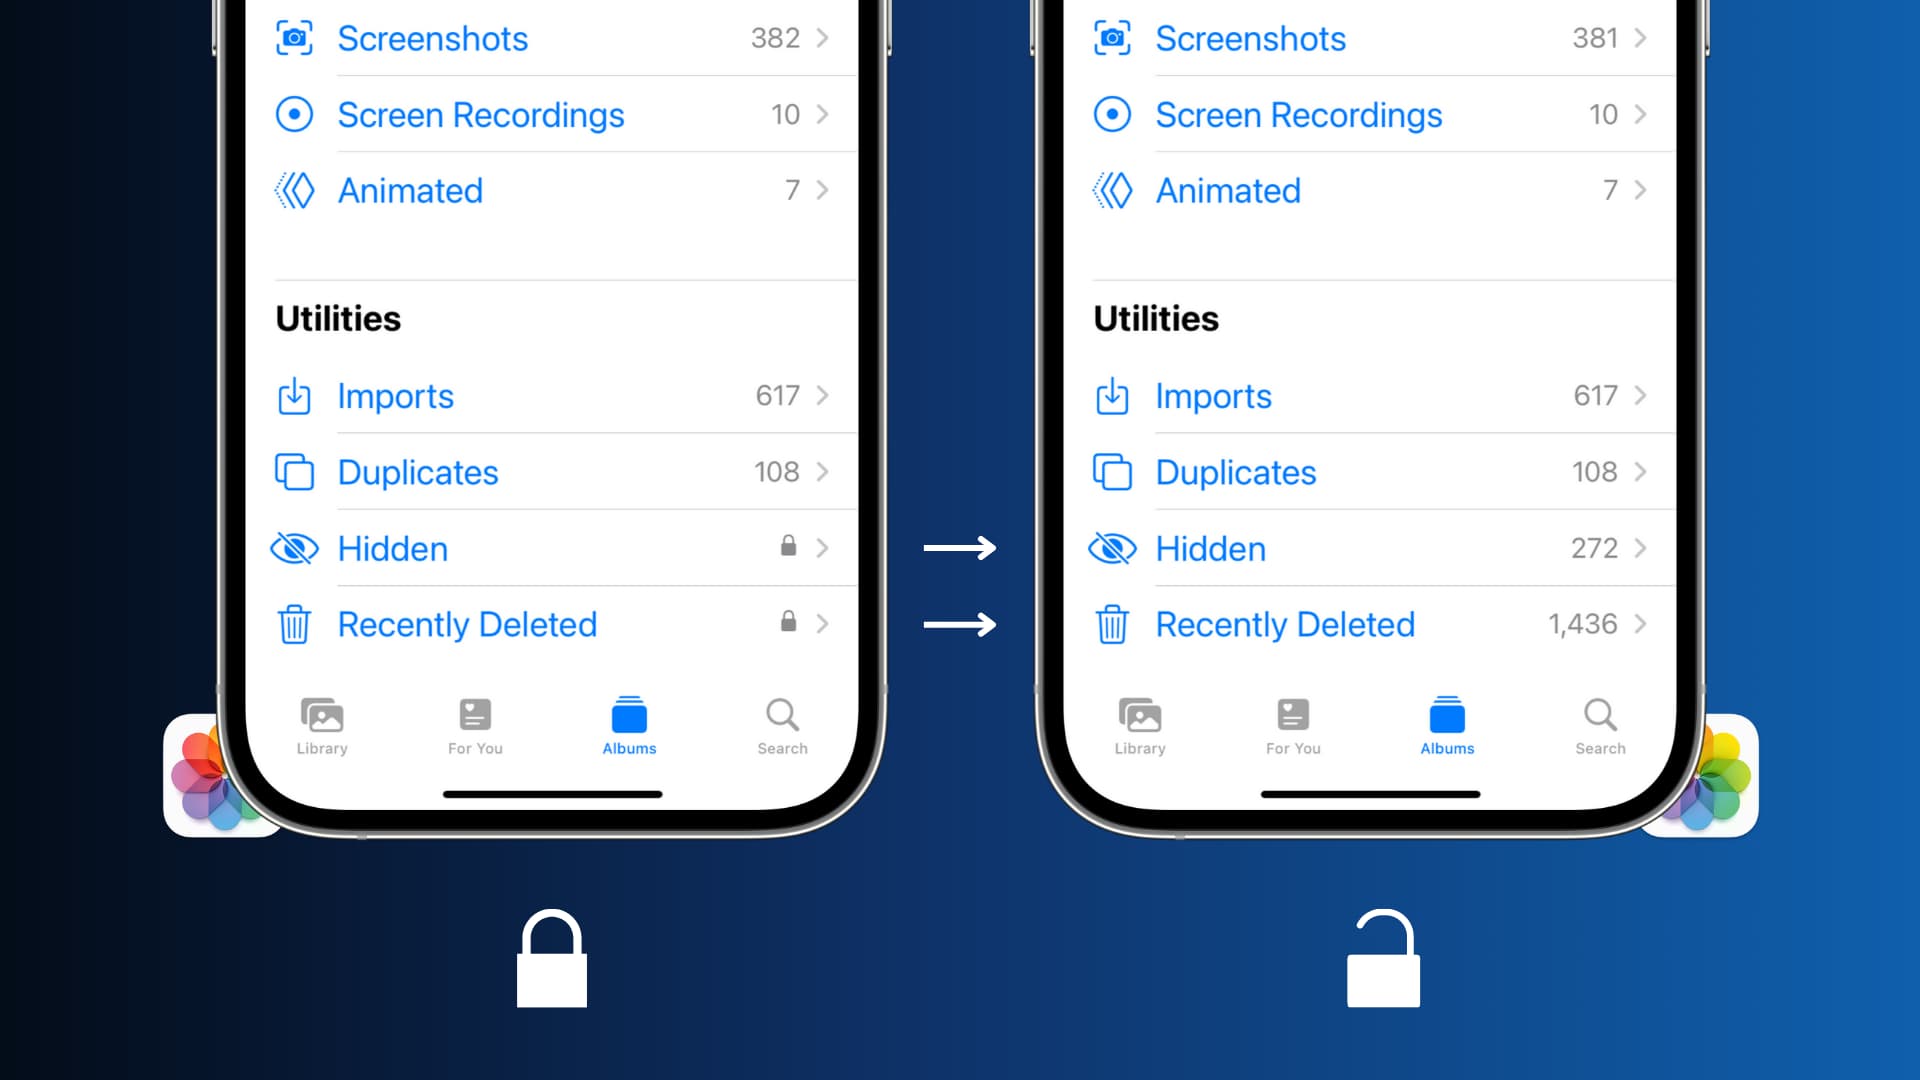 Two iPhone mockups with one showing locked Hidden and Recently Deleted sections in the Photos app while the other showing them as unlocked